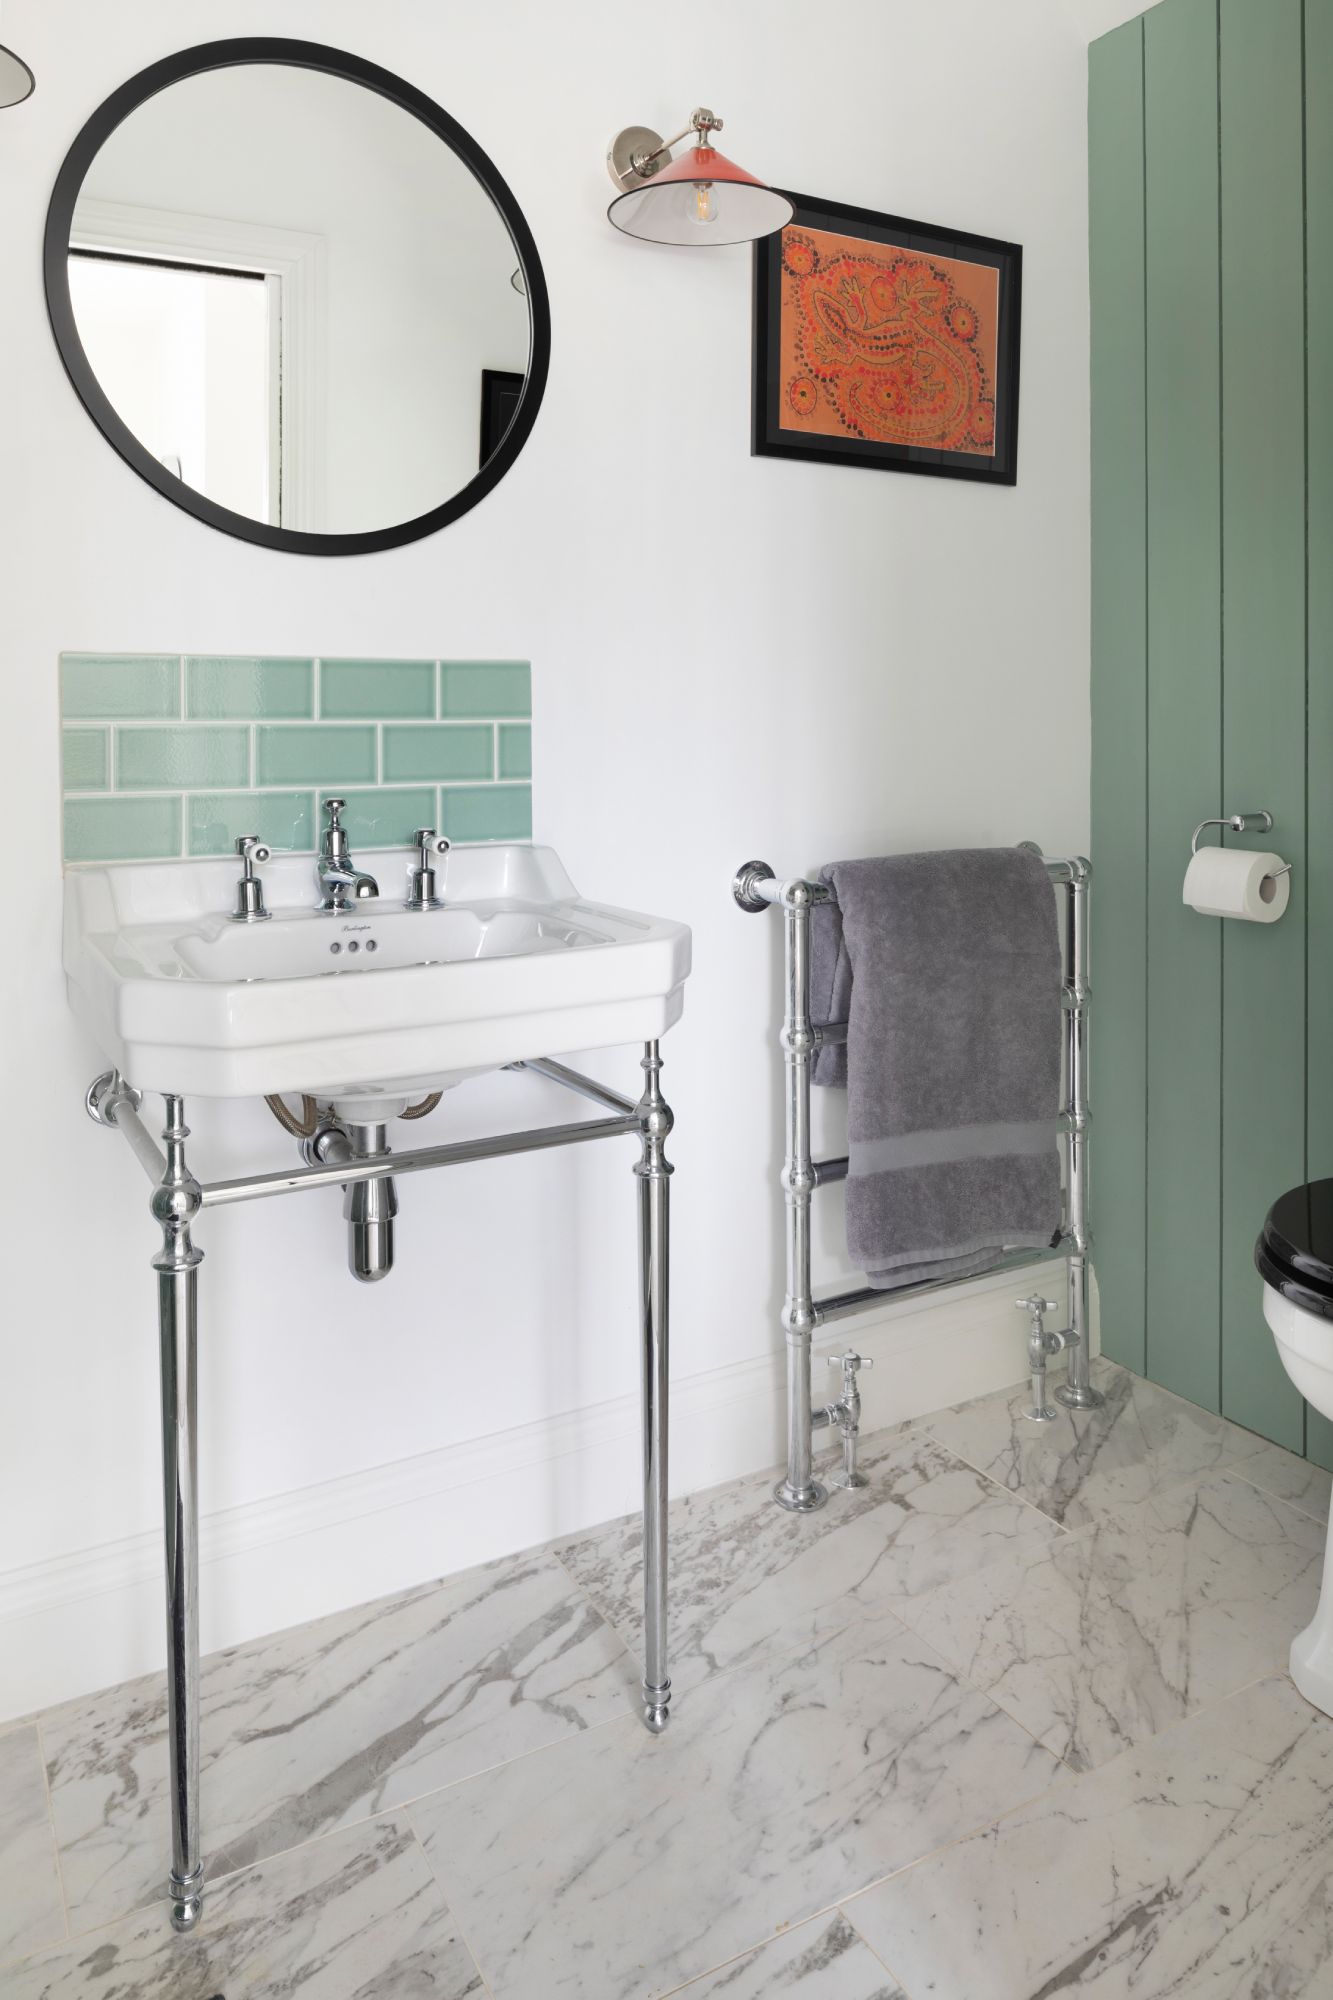 Bathroom with mint elements